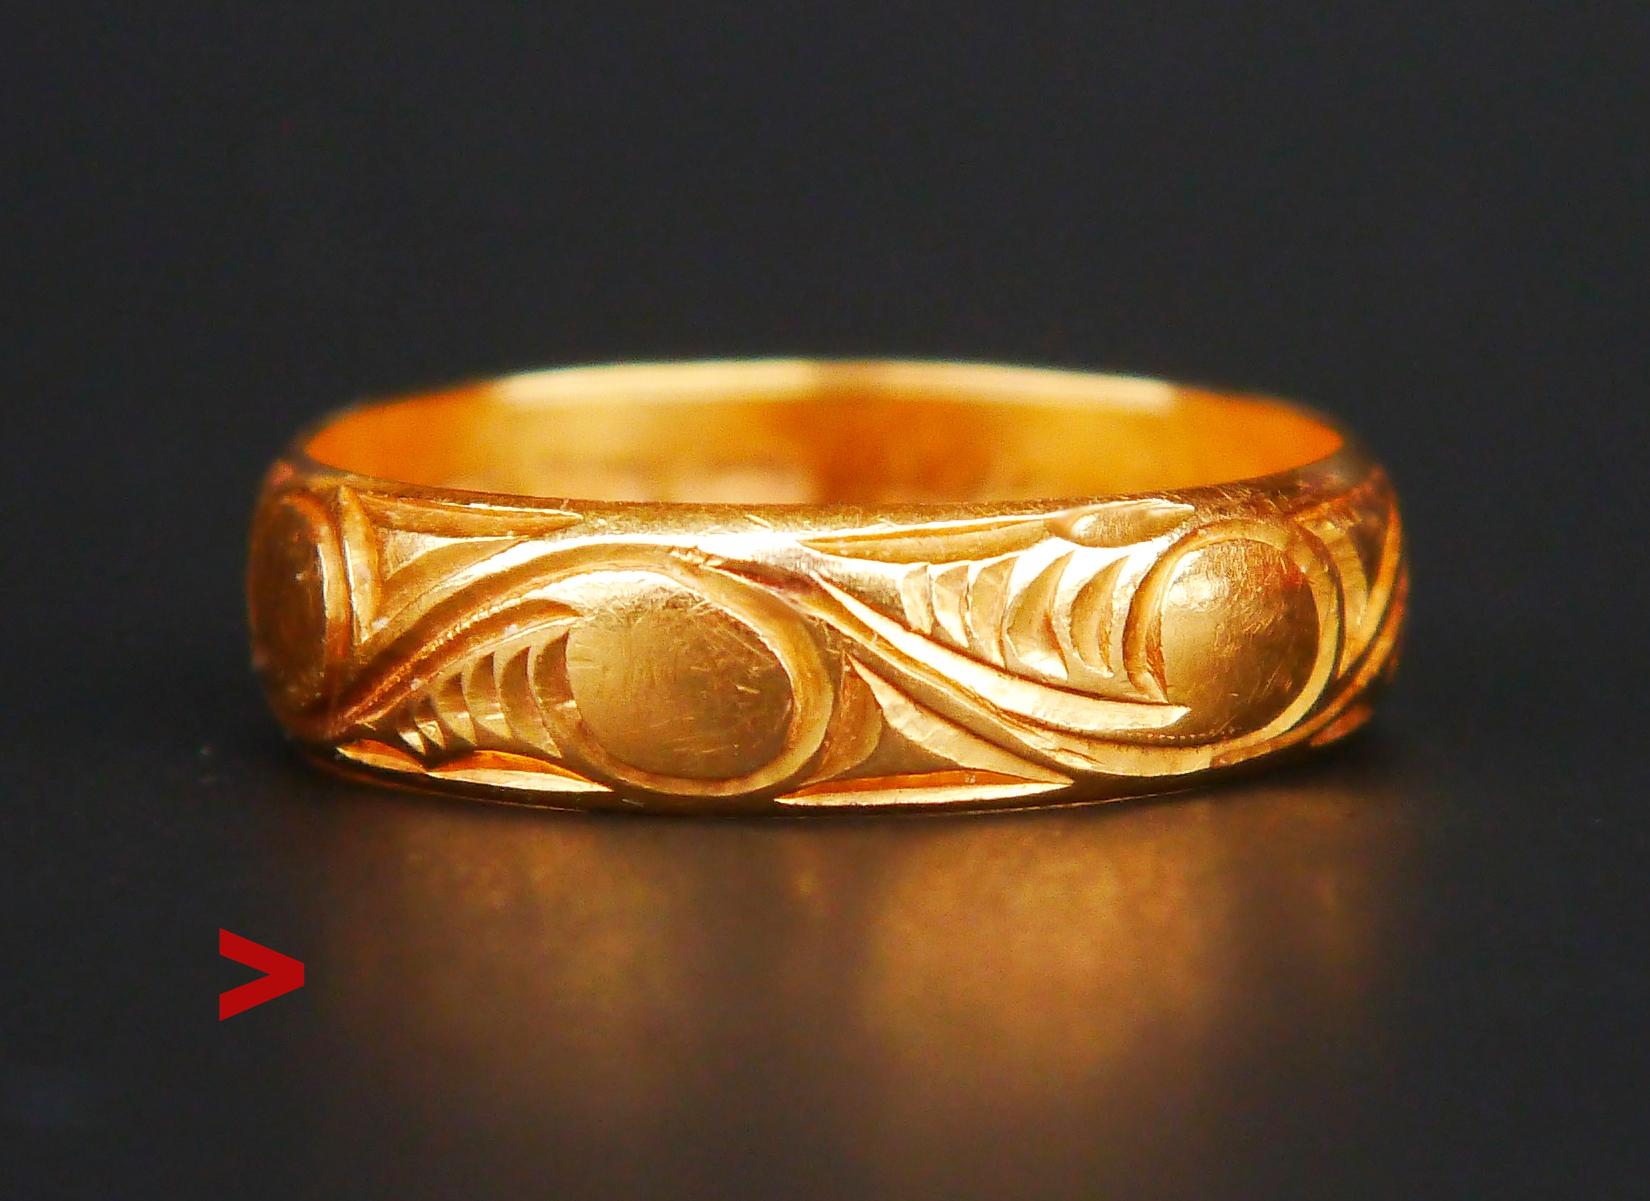 Antique Wedding Ring for Men or Women in solid 20K Yellow Gold. Engraved continuous wavy ornament around the band.

Made in Sweden. Workshop of Jeweler Andersson Gust, city of Varberg, active between 1887 and 1925.

Year mark: X6 / made in